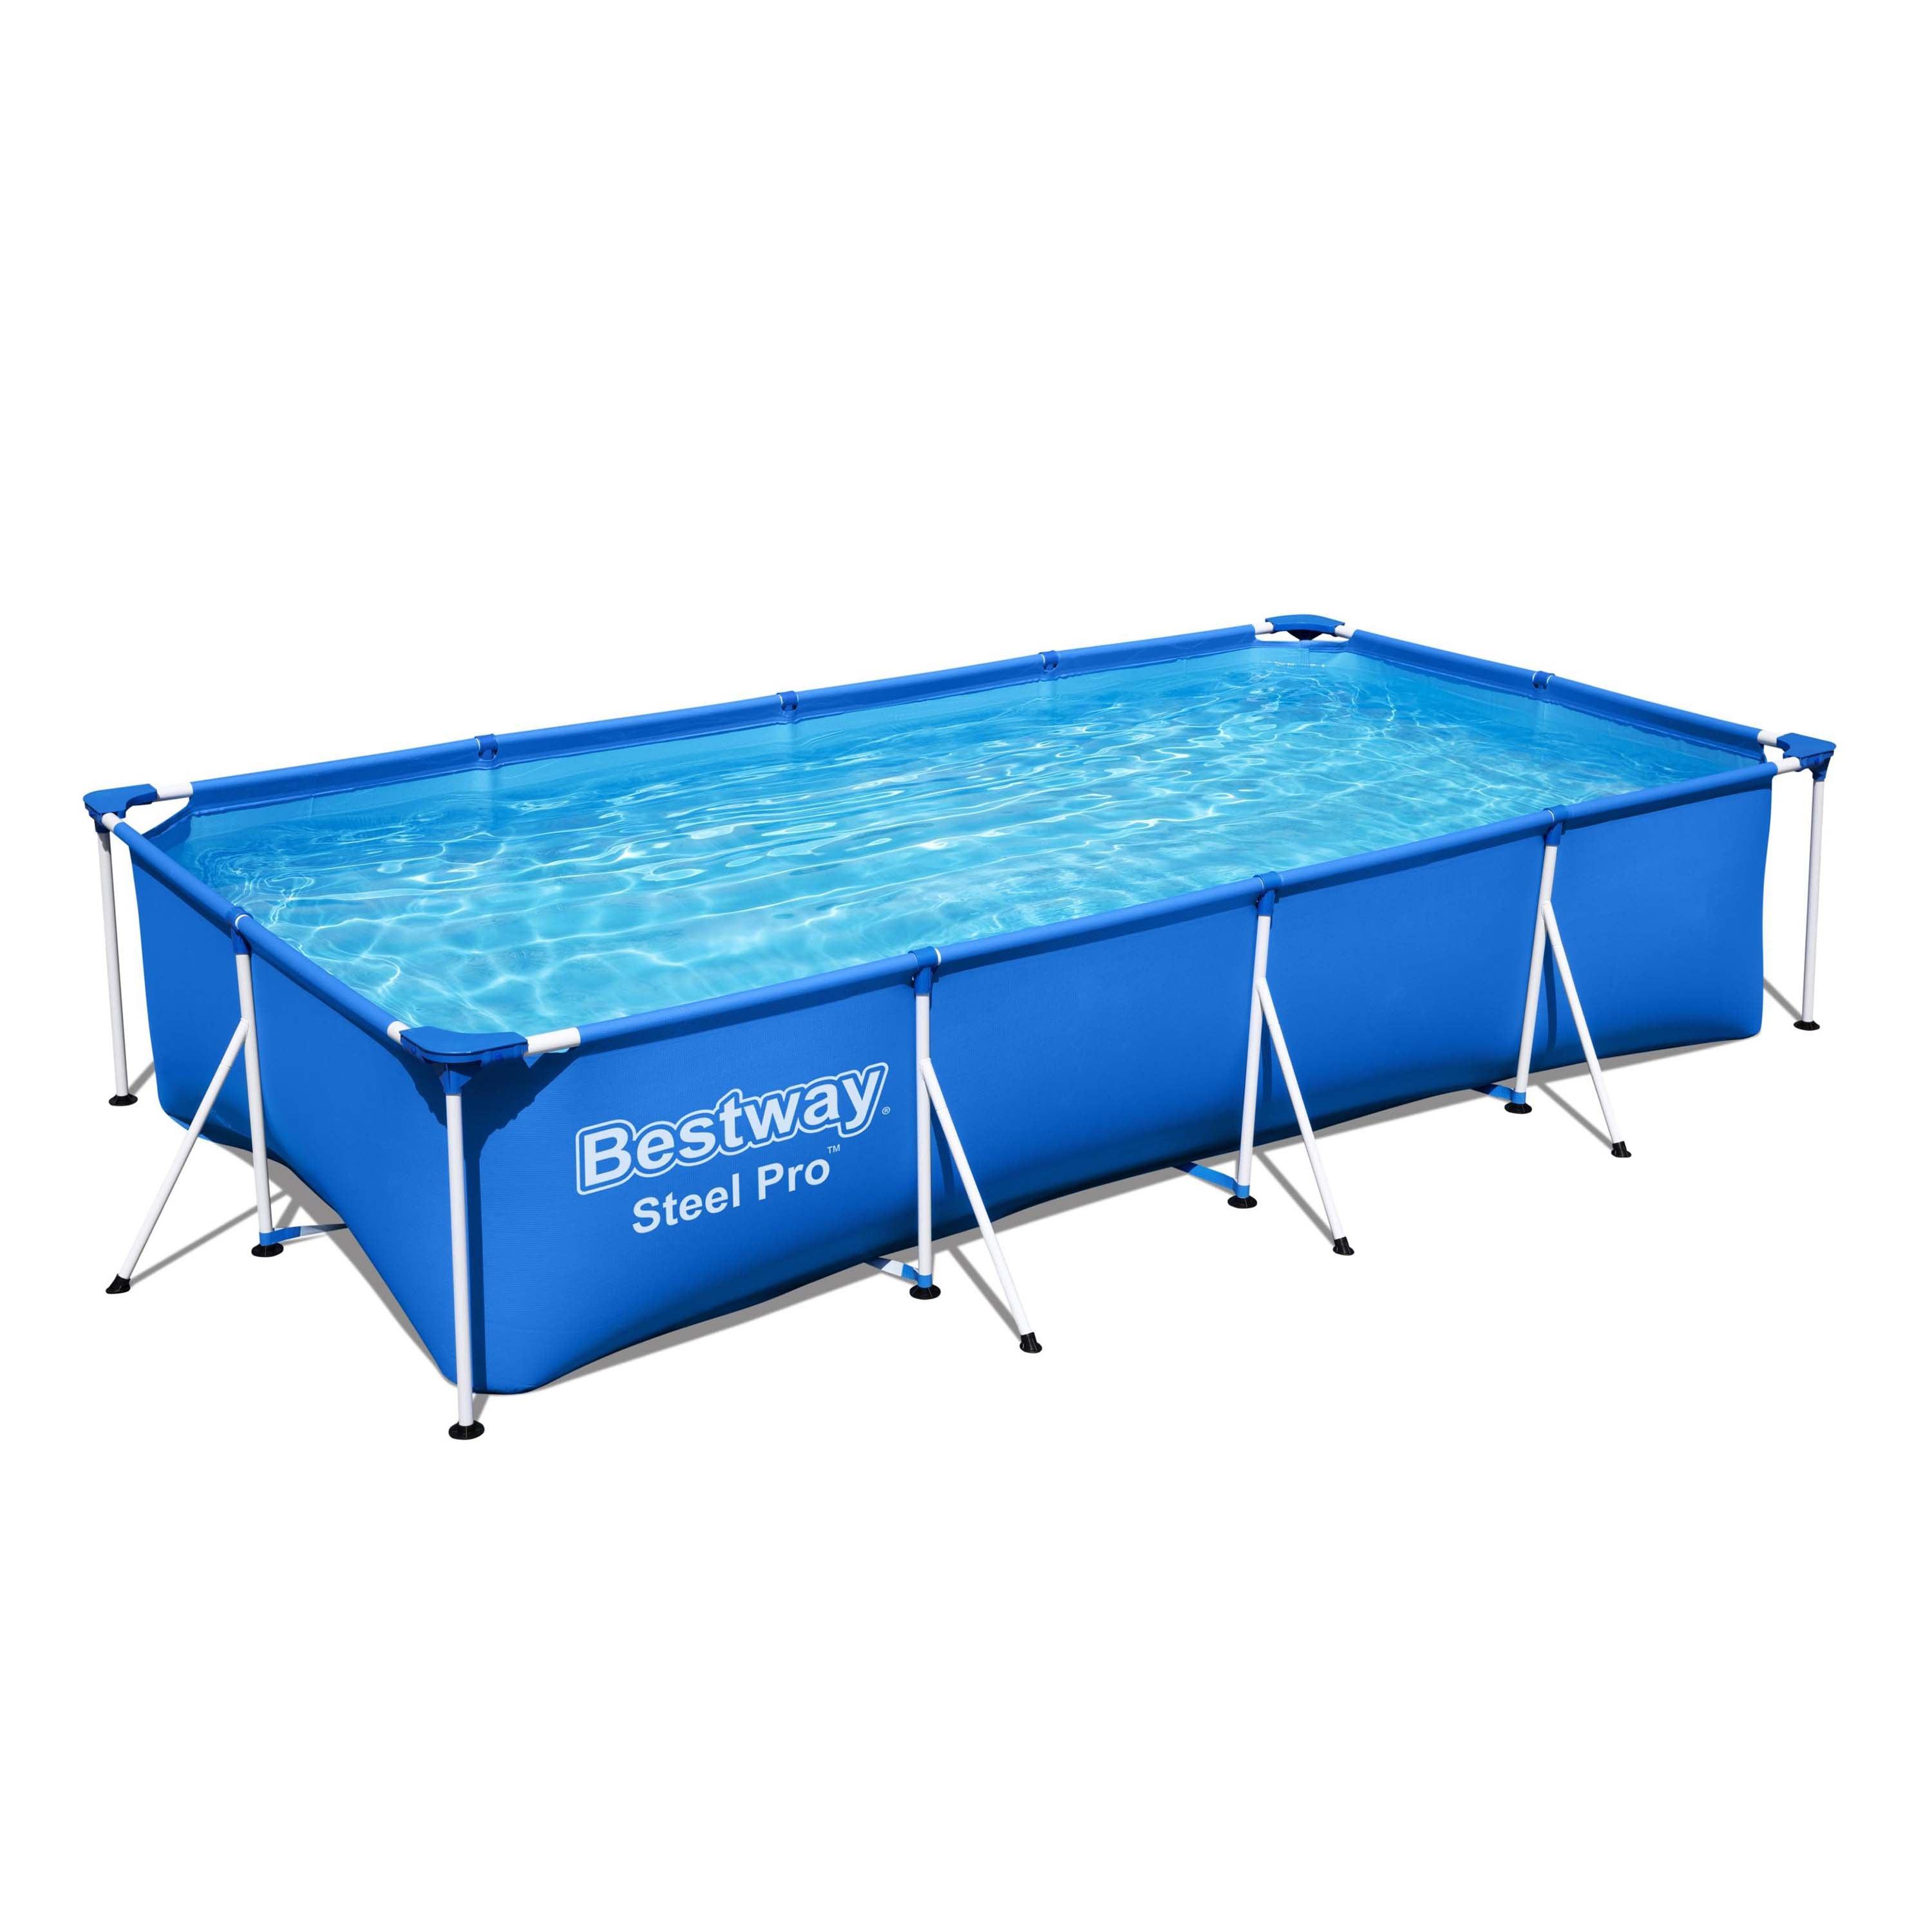 Steel Pro Frame Pool, 400 x 211 x 81 cm, without pump, square, blue - Ourkids - Bestway